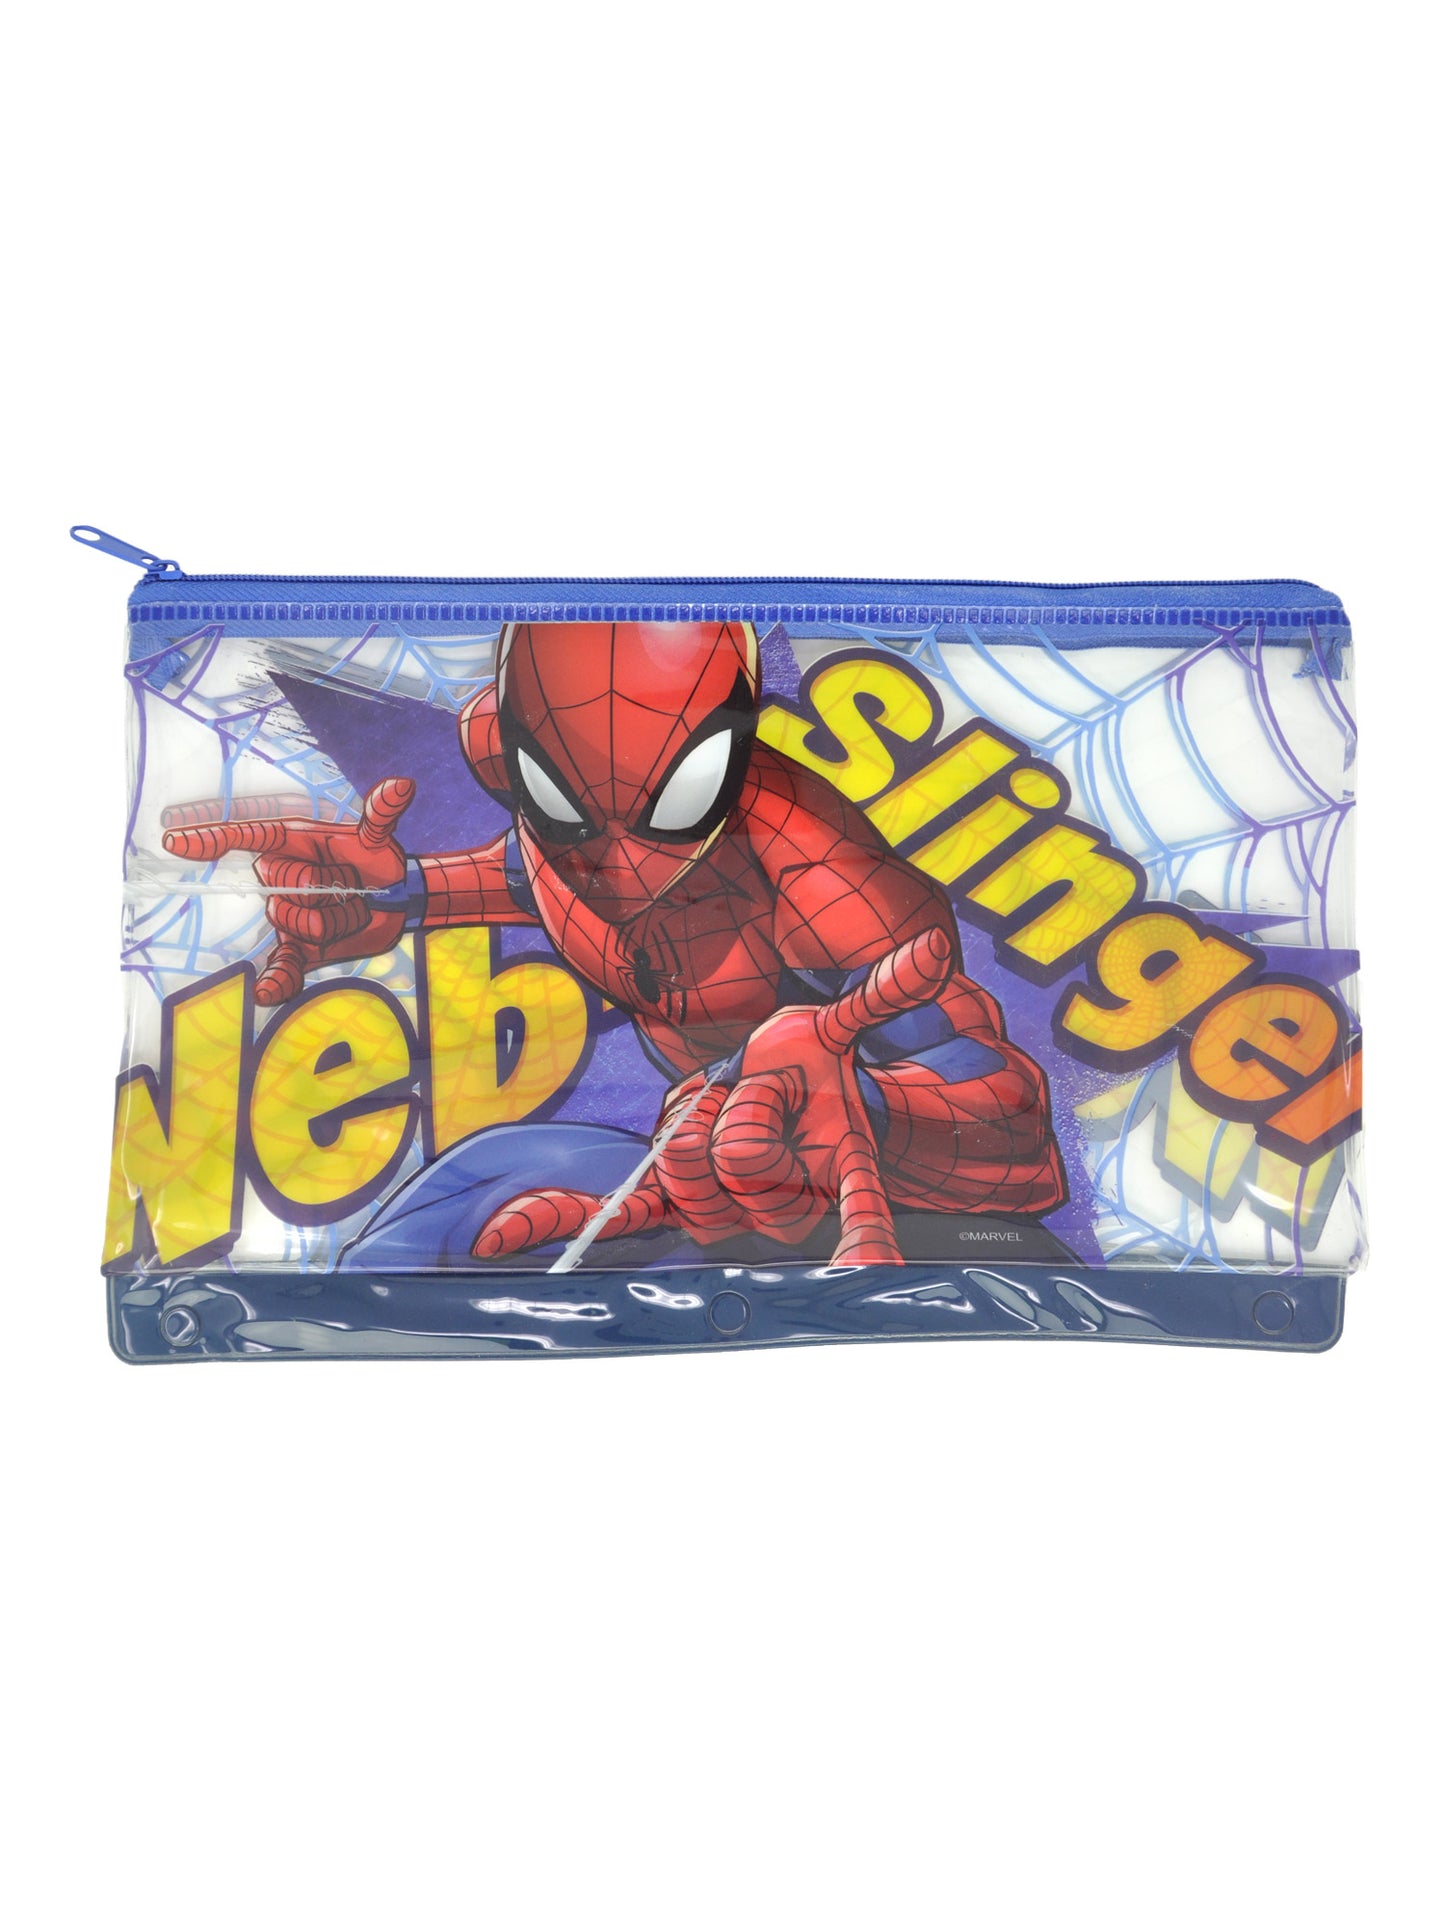 Boys Spider-Man Backpack, Insulated Lunch Bag & Pencil Pouch School 3-Piece Set